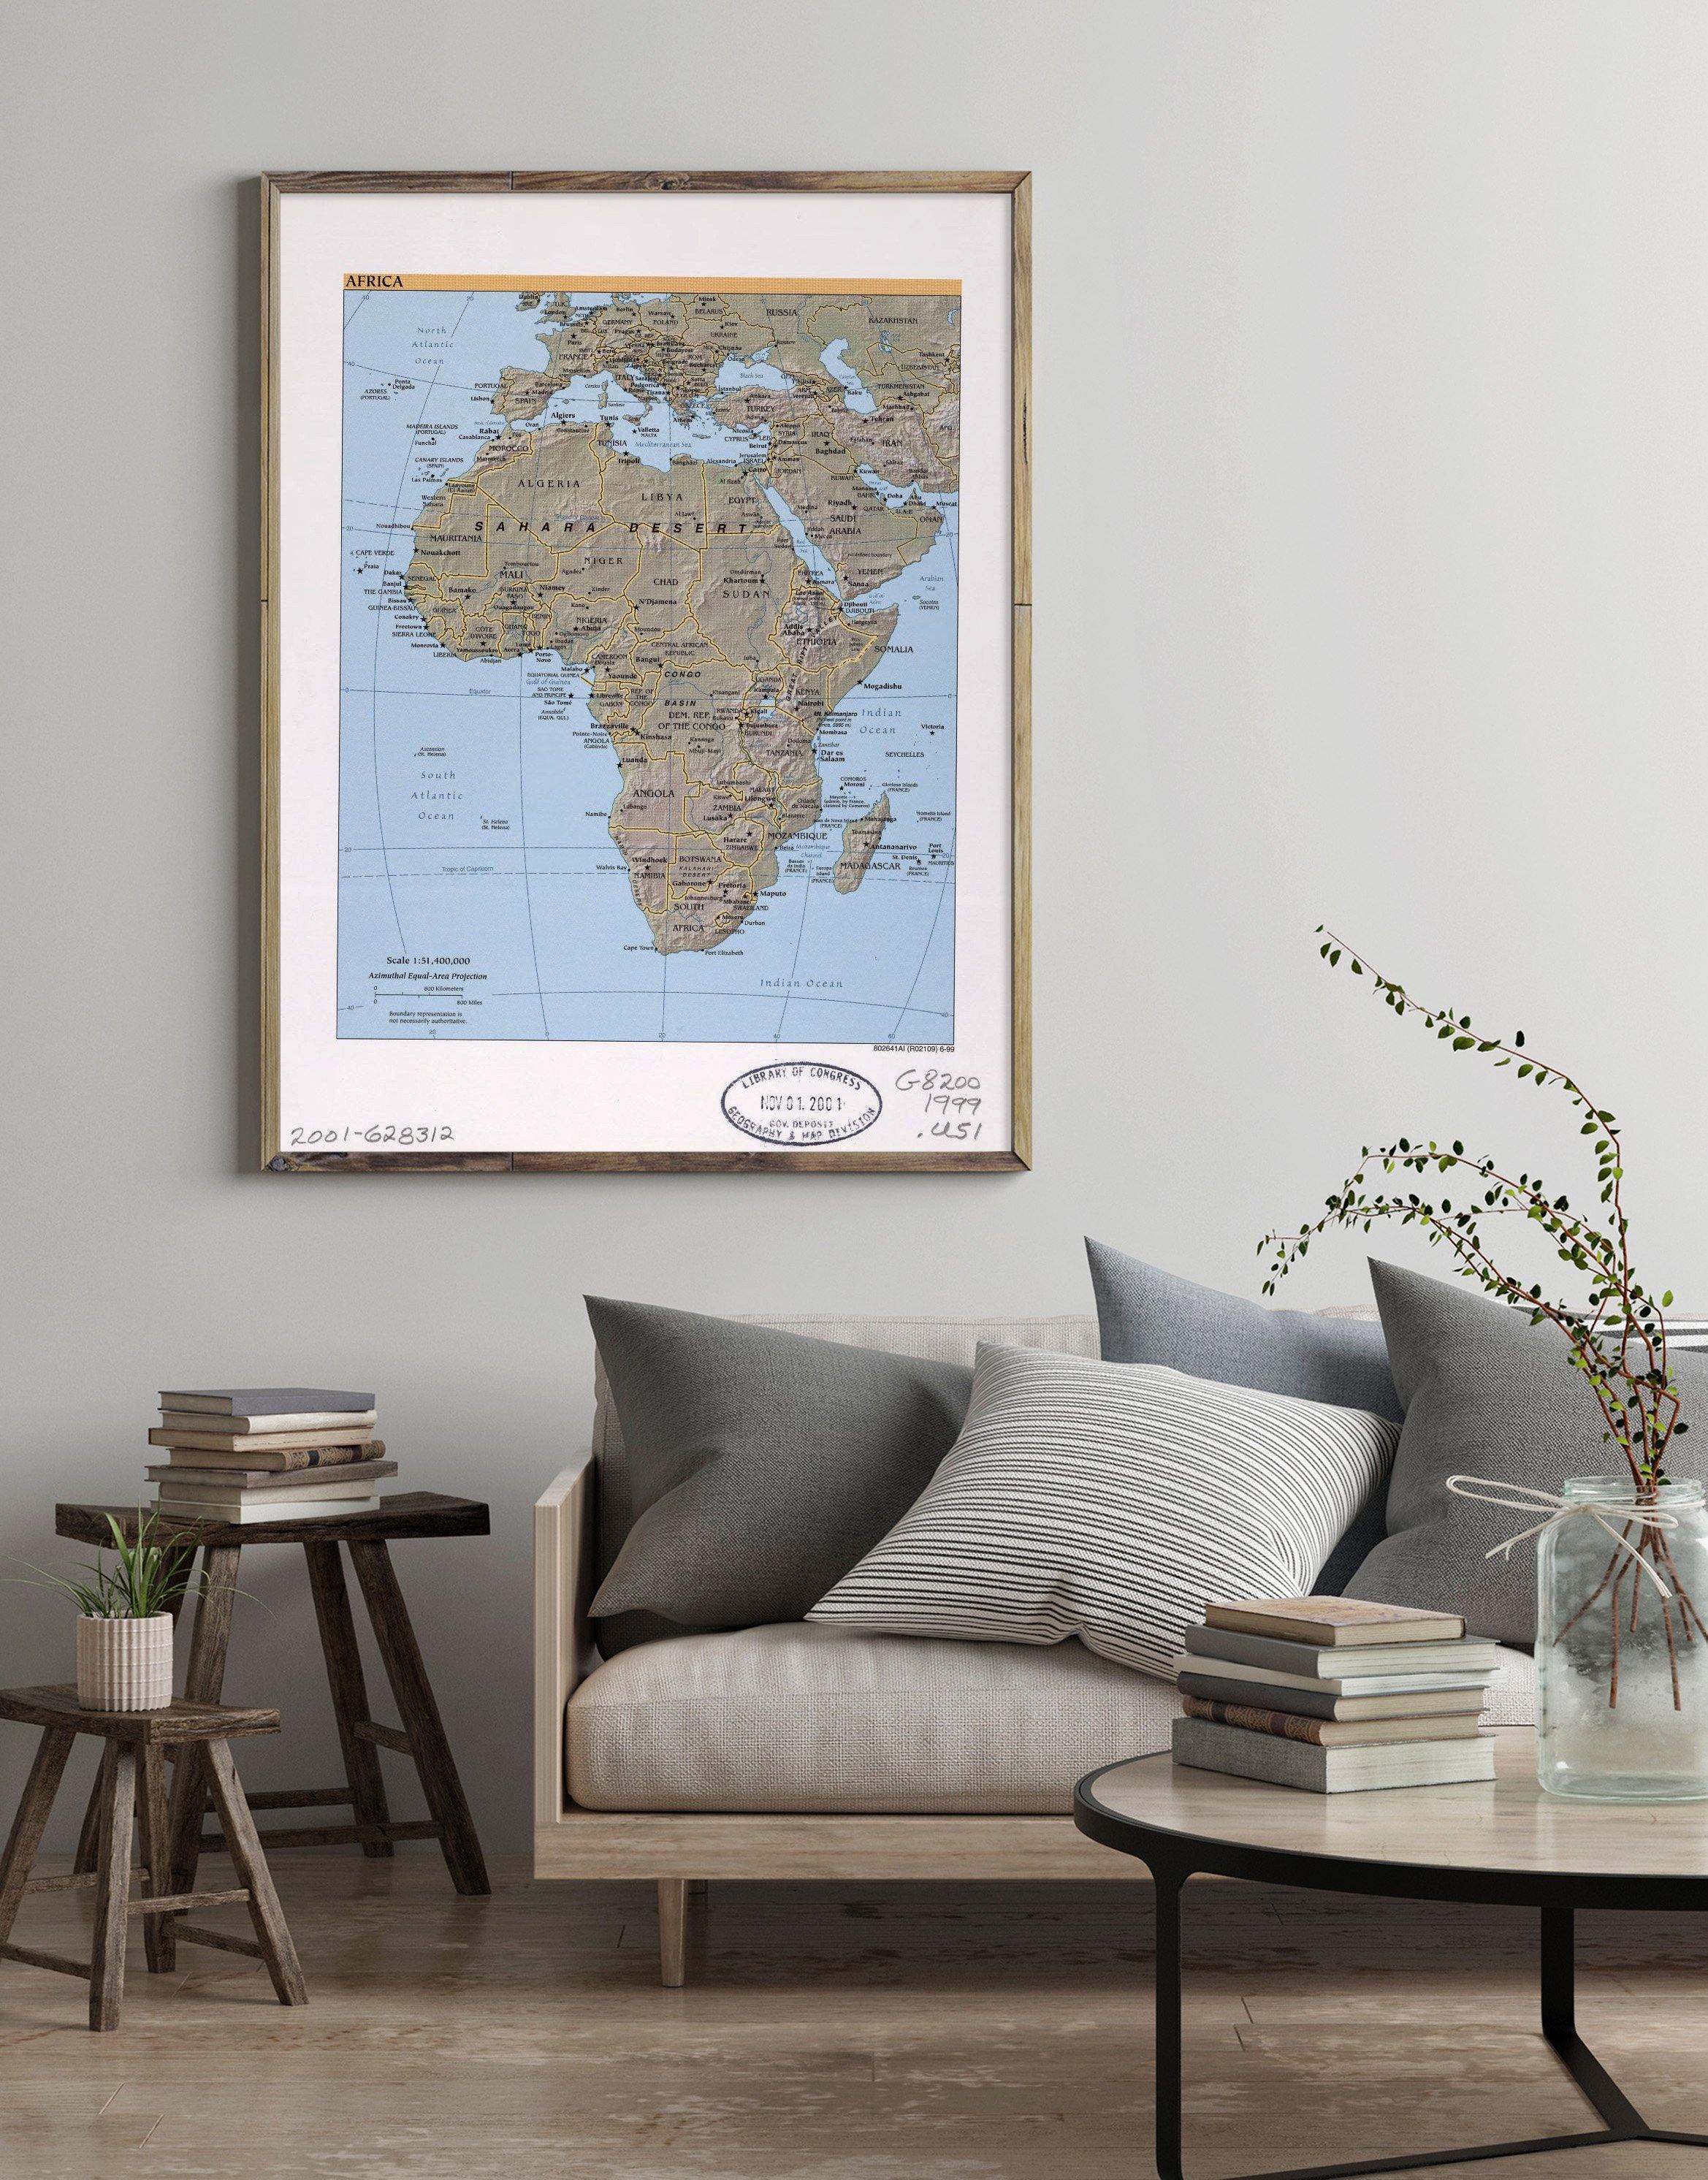 1999 Map| Africa| Africa Map Size: 18 inches x 24 inches |Fits 18x24 s - New York Map Company